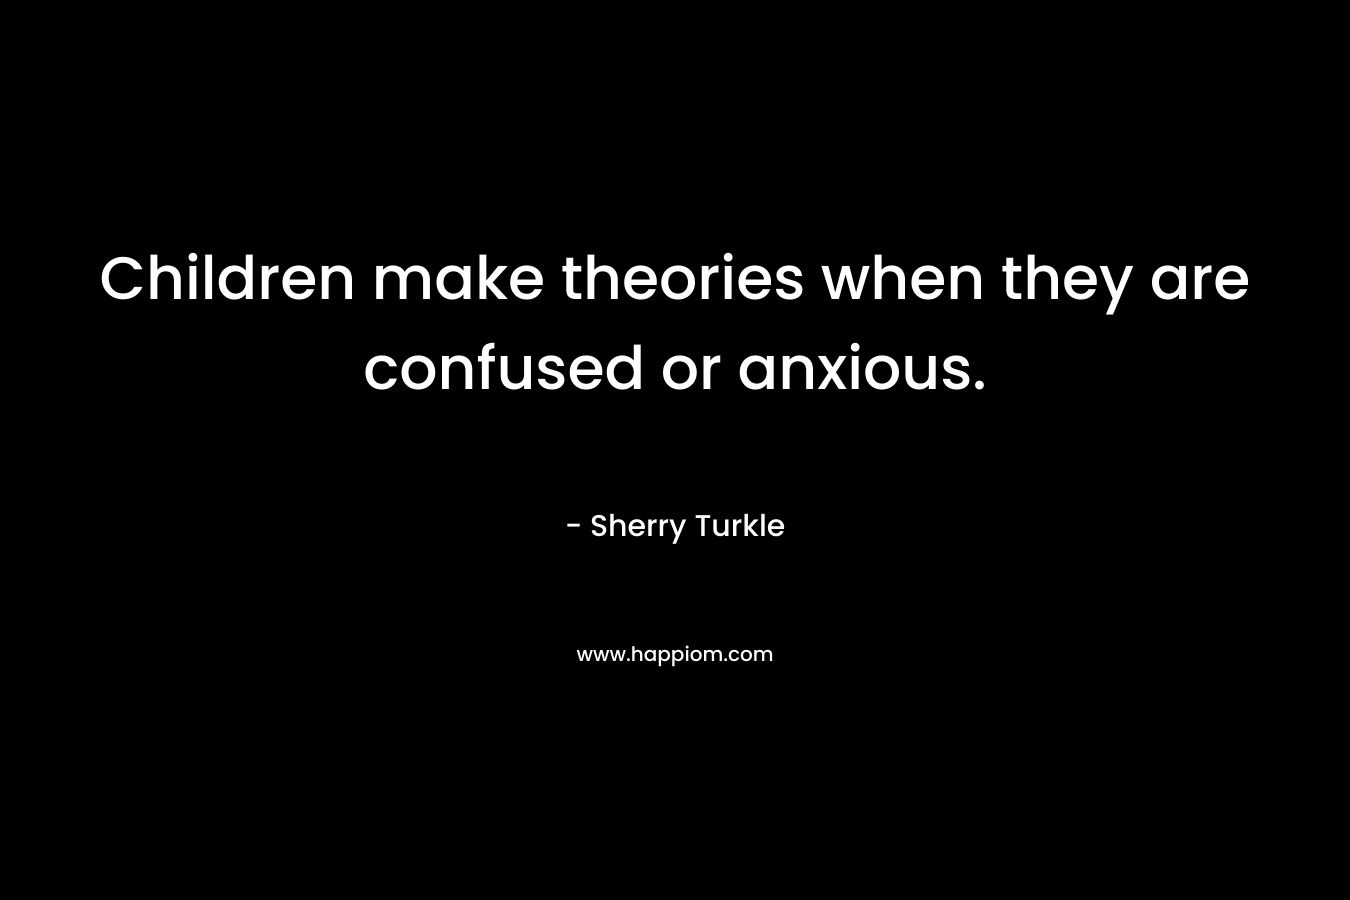 Children make theories when they are confused or anxious. – Sherry Turkle